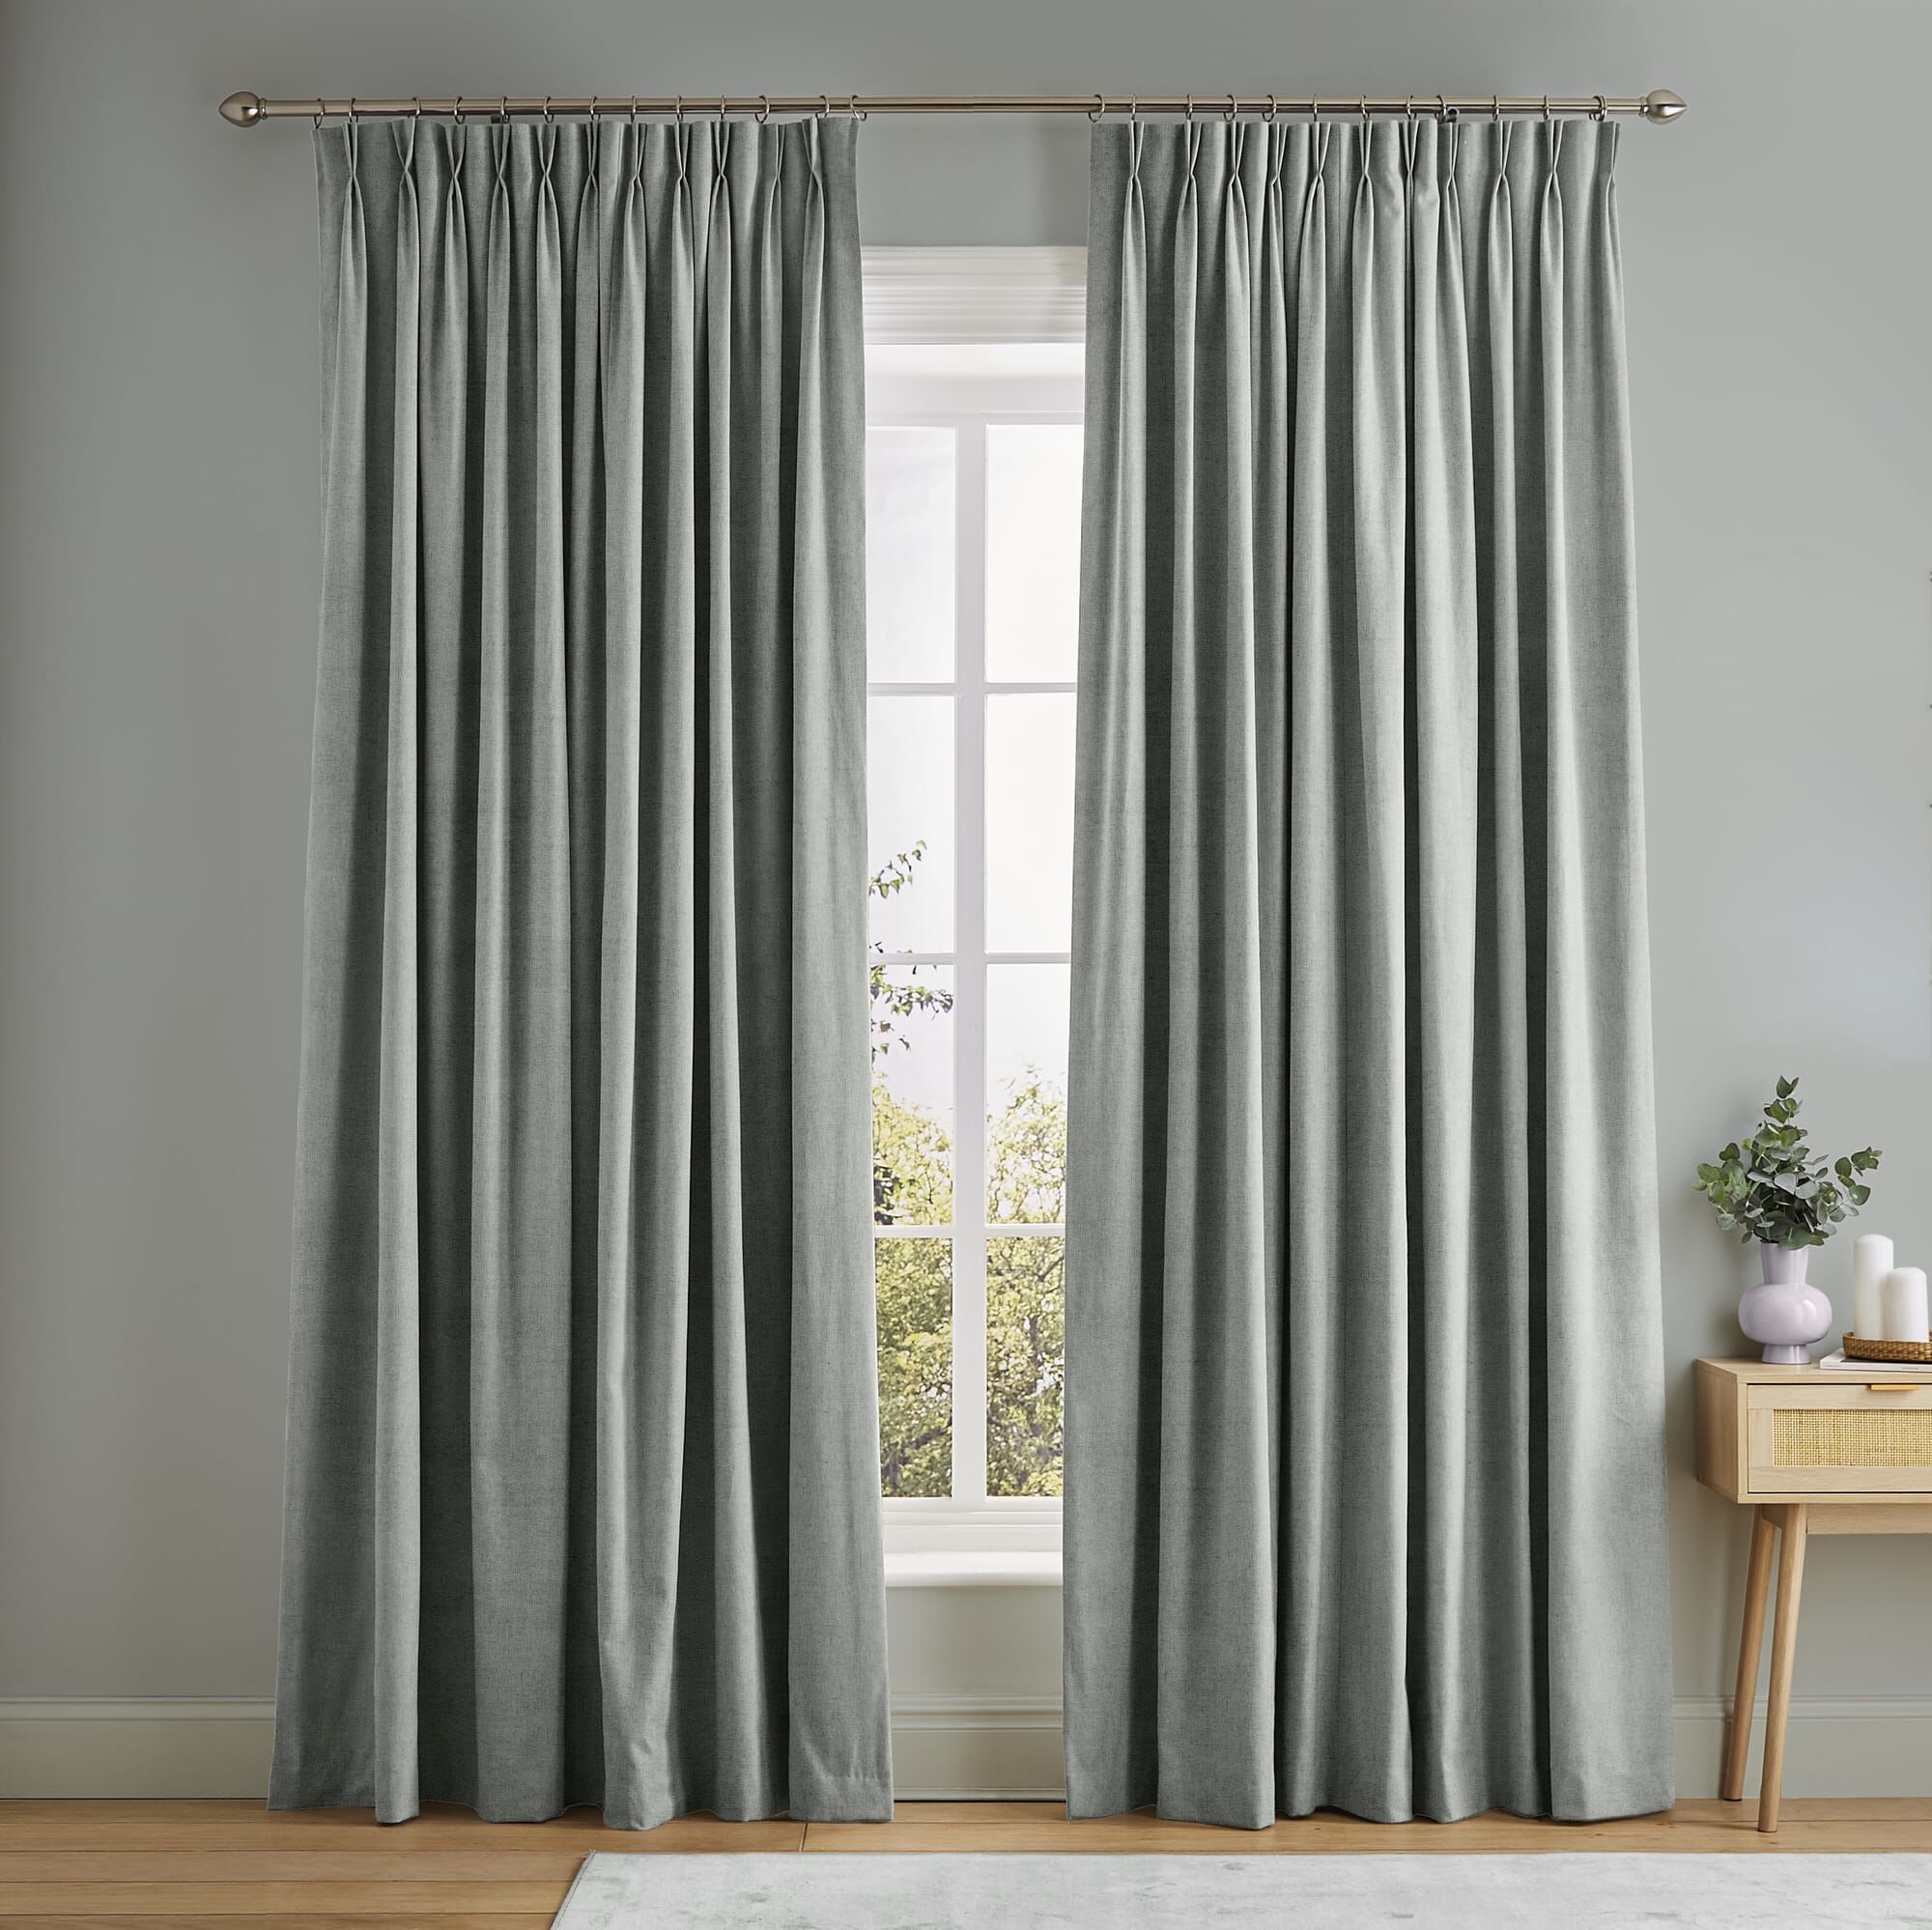 Serenity Soft Gray Curtains